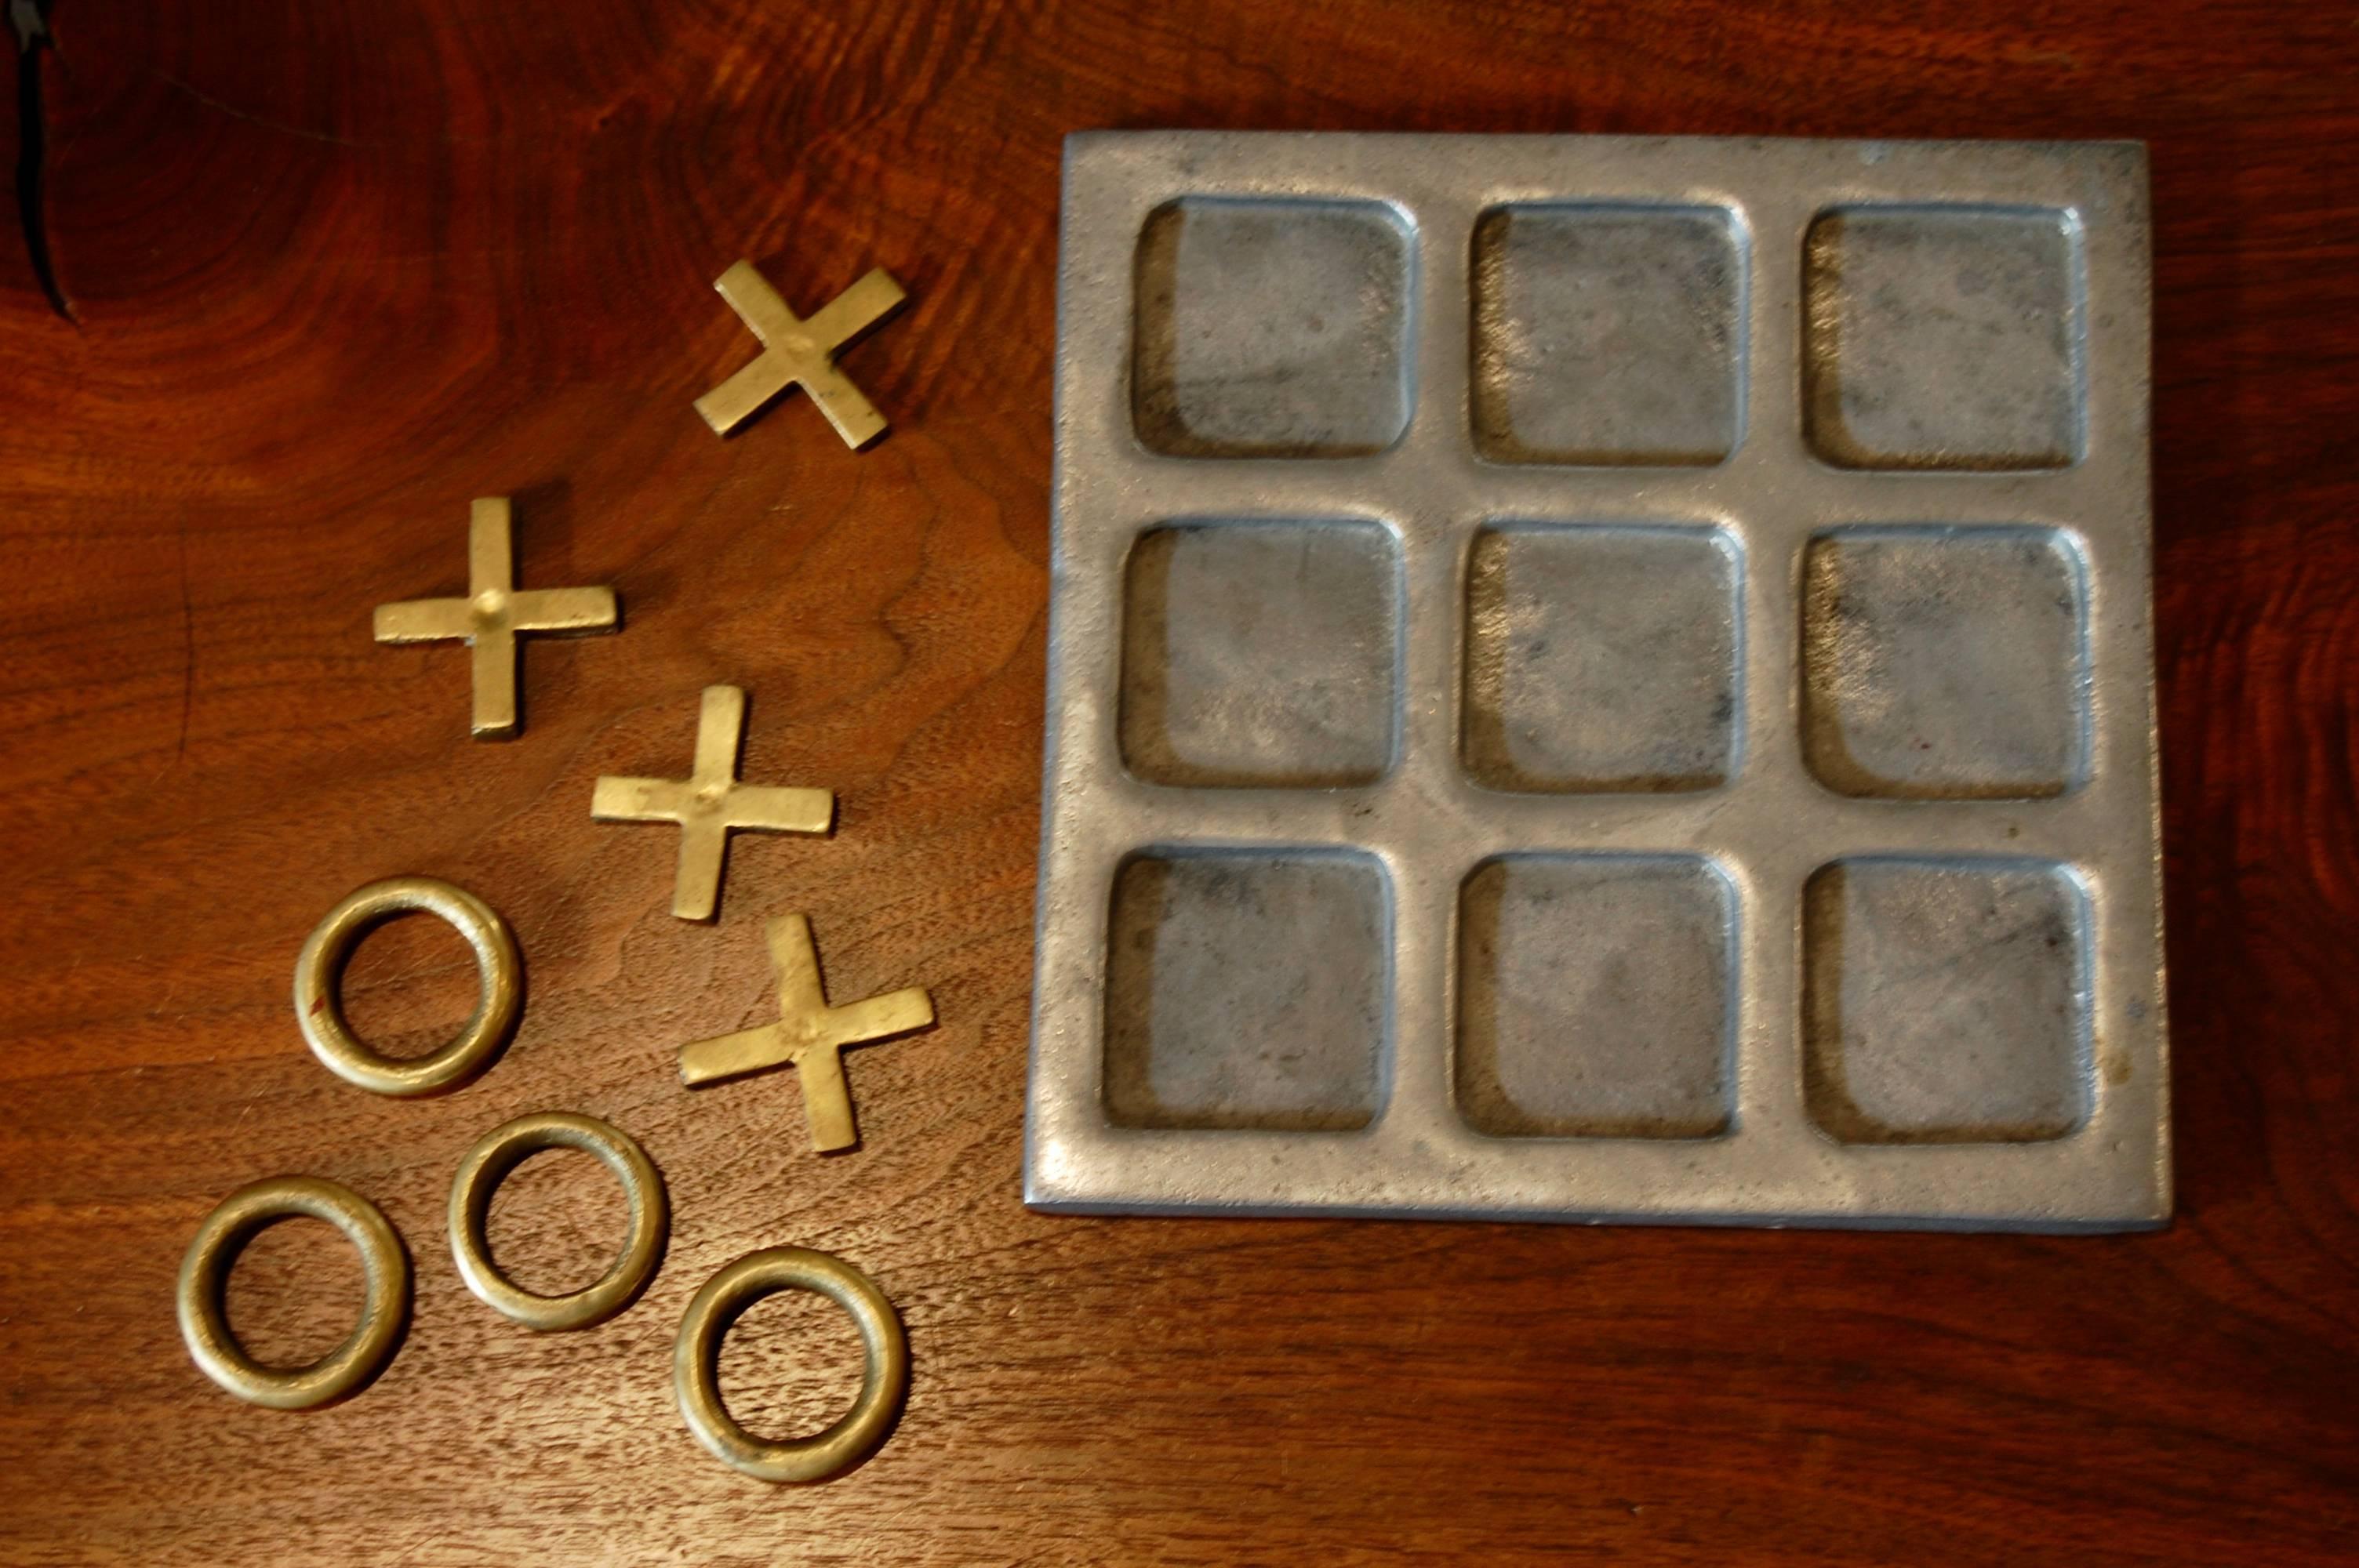 1970s Tic Tac Toe game with a cast aluminum base with bass X's and O's.